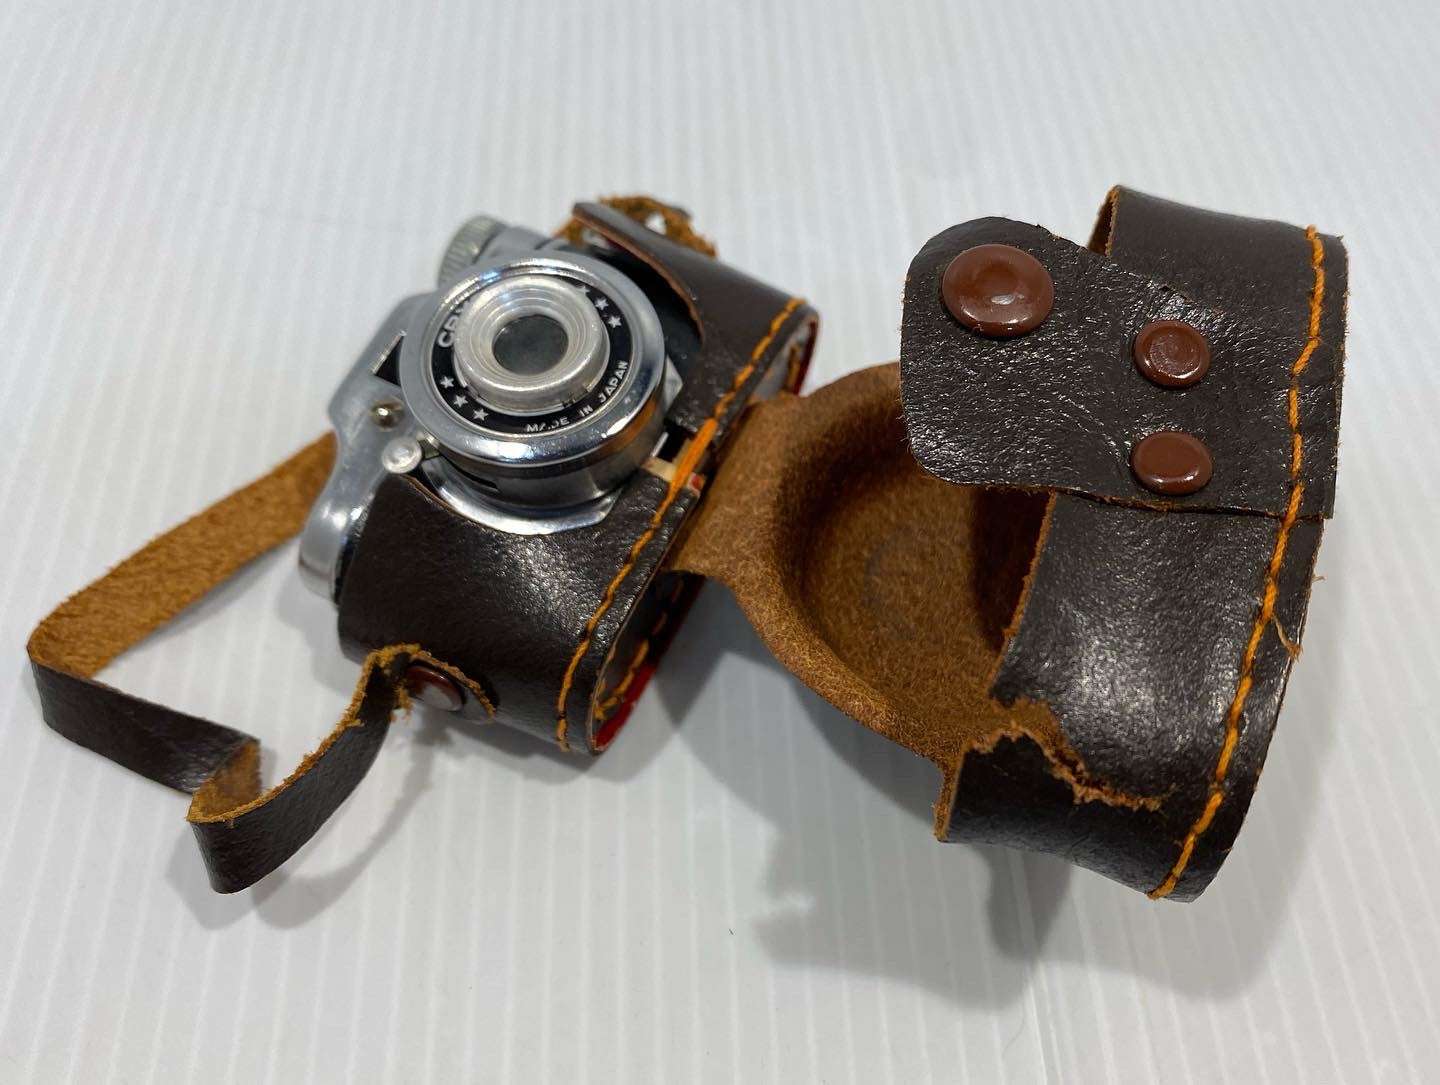 Vintage 1950's Miniature Crystar mini Camera with original leather case. Made in Japan!